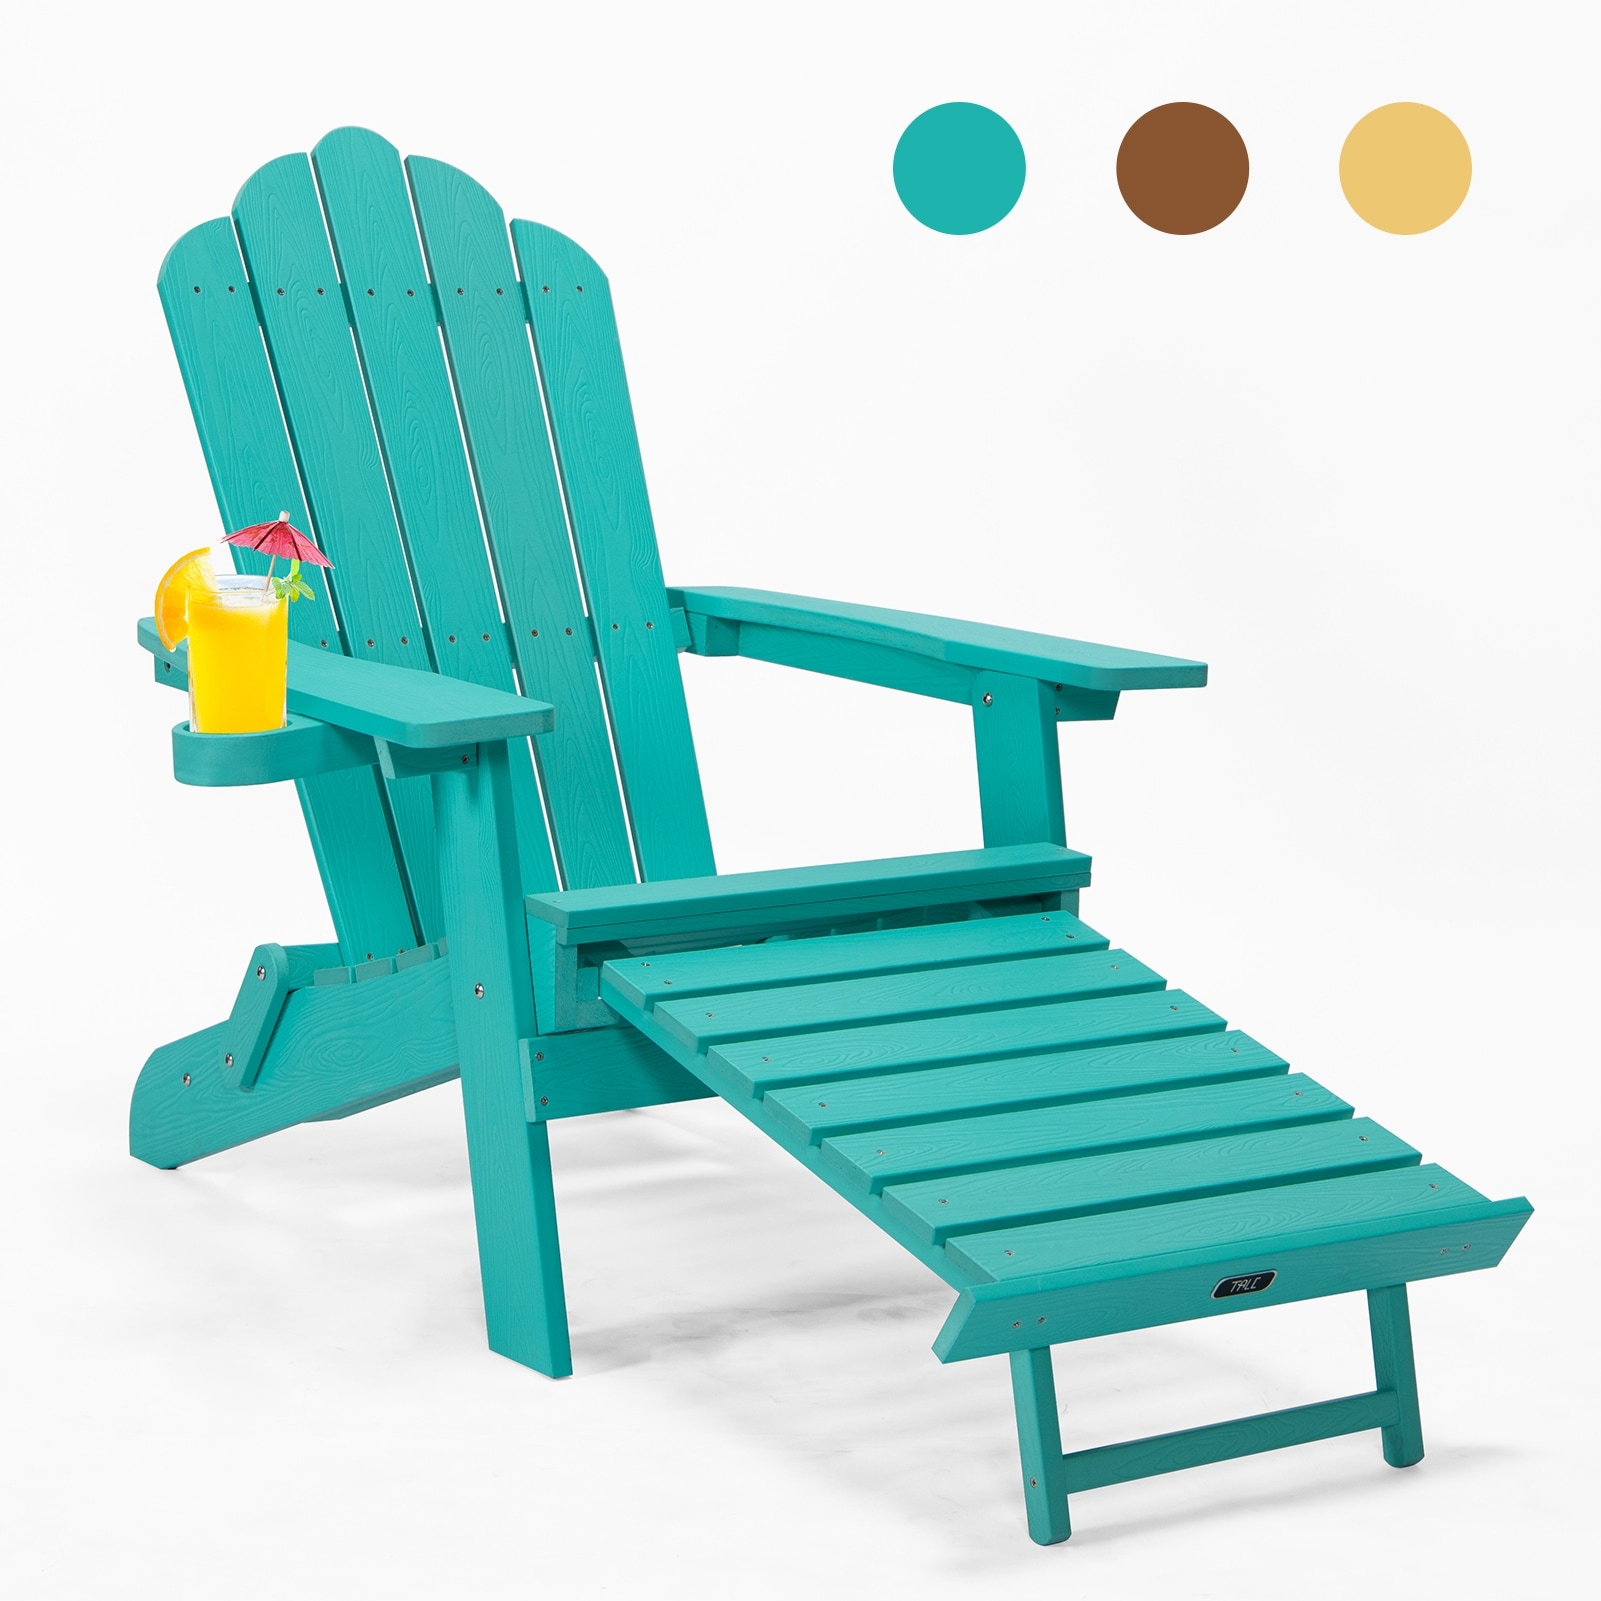 Outdoor Patio Garden Furniture  Adirondack Chair With Cup Holder  Retractable Footrest  Ergonomical Fanback and Folding Design